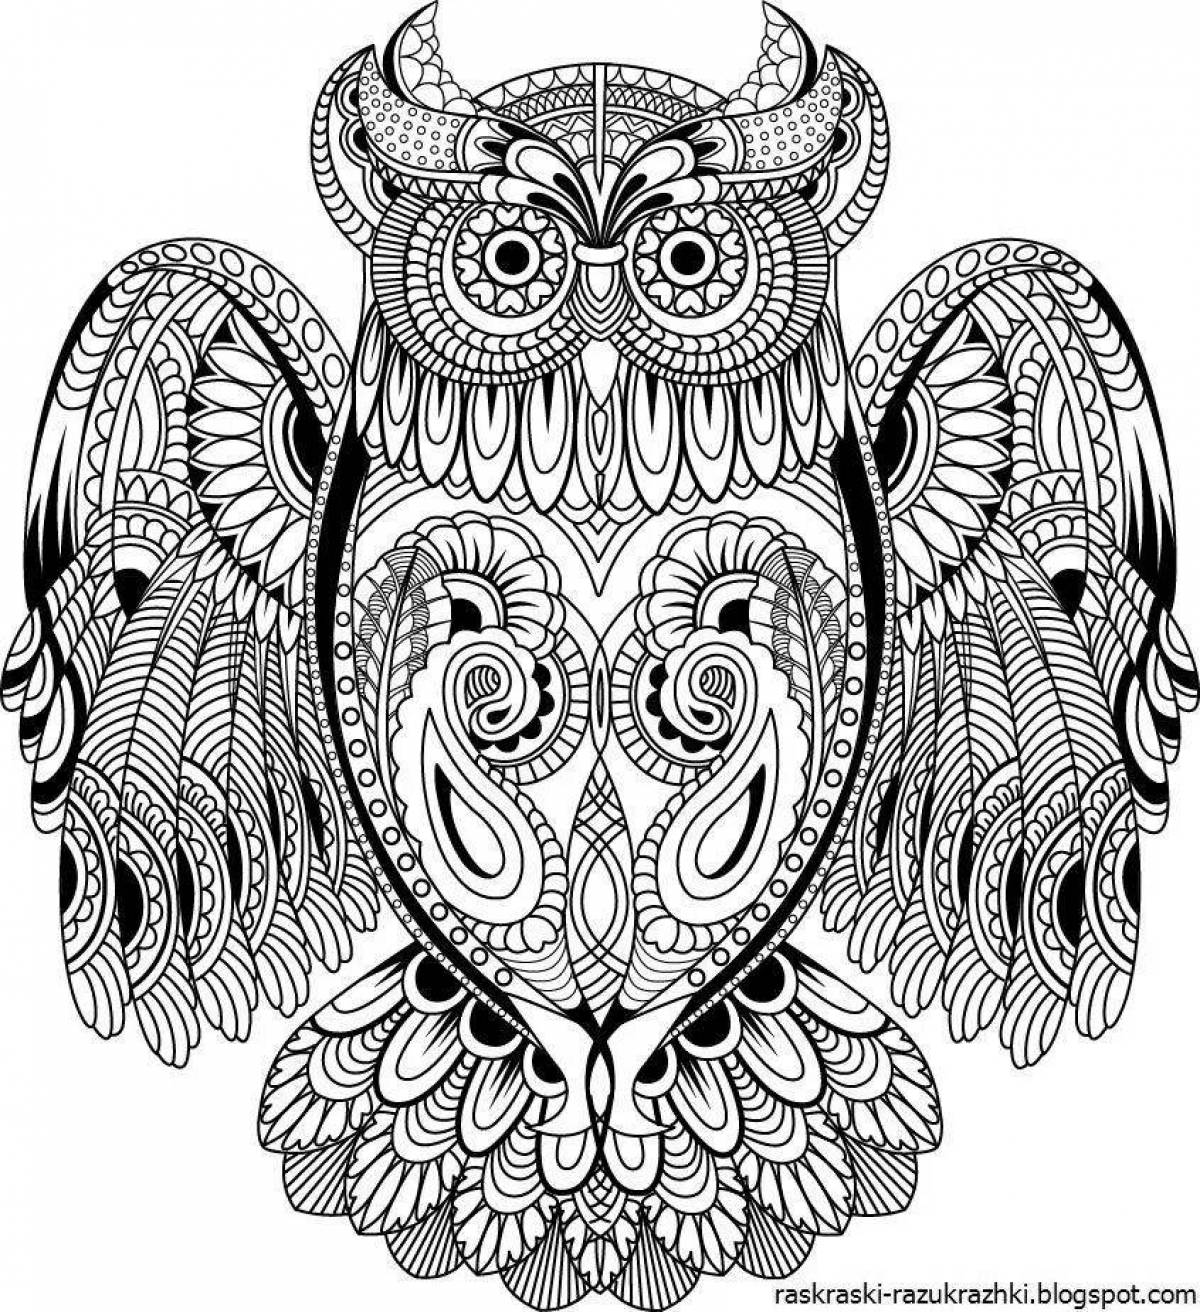 Intriguing owl coloring book